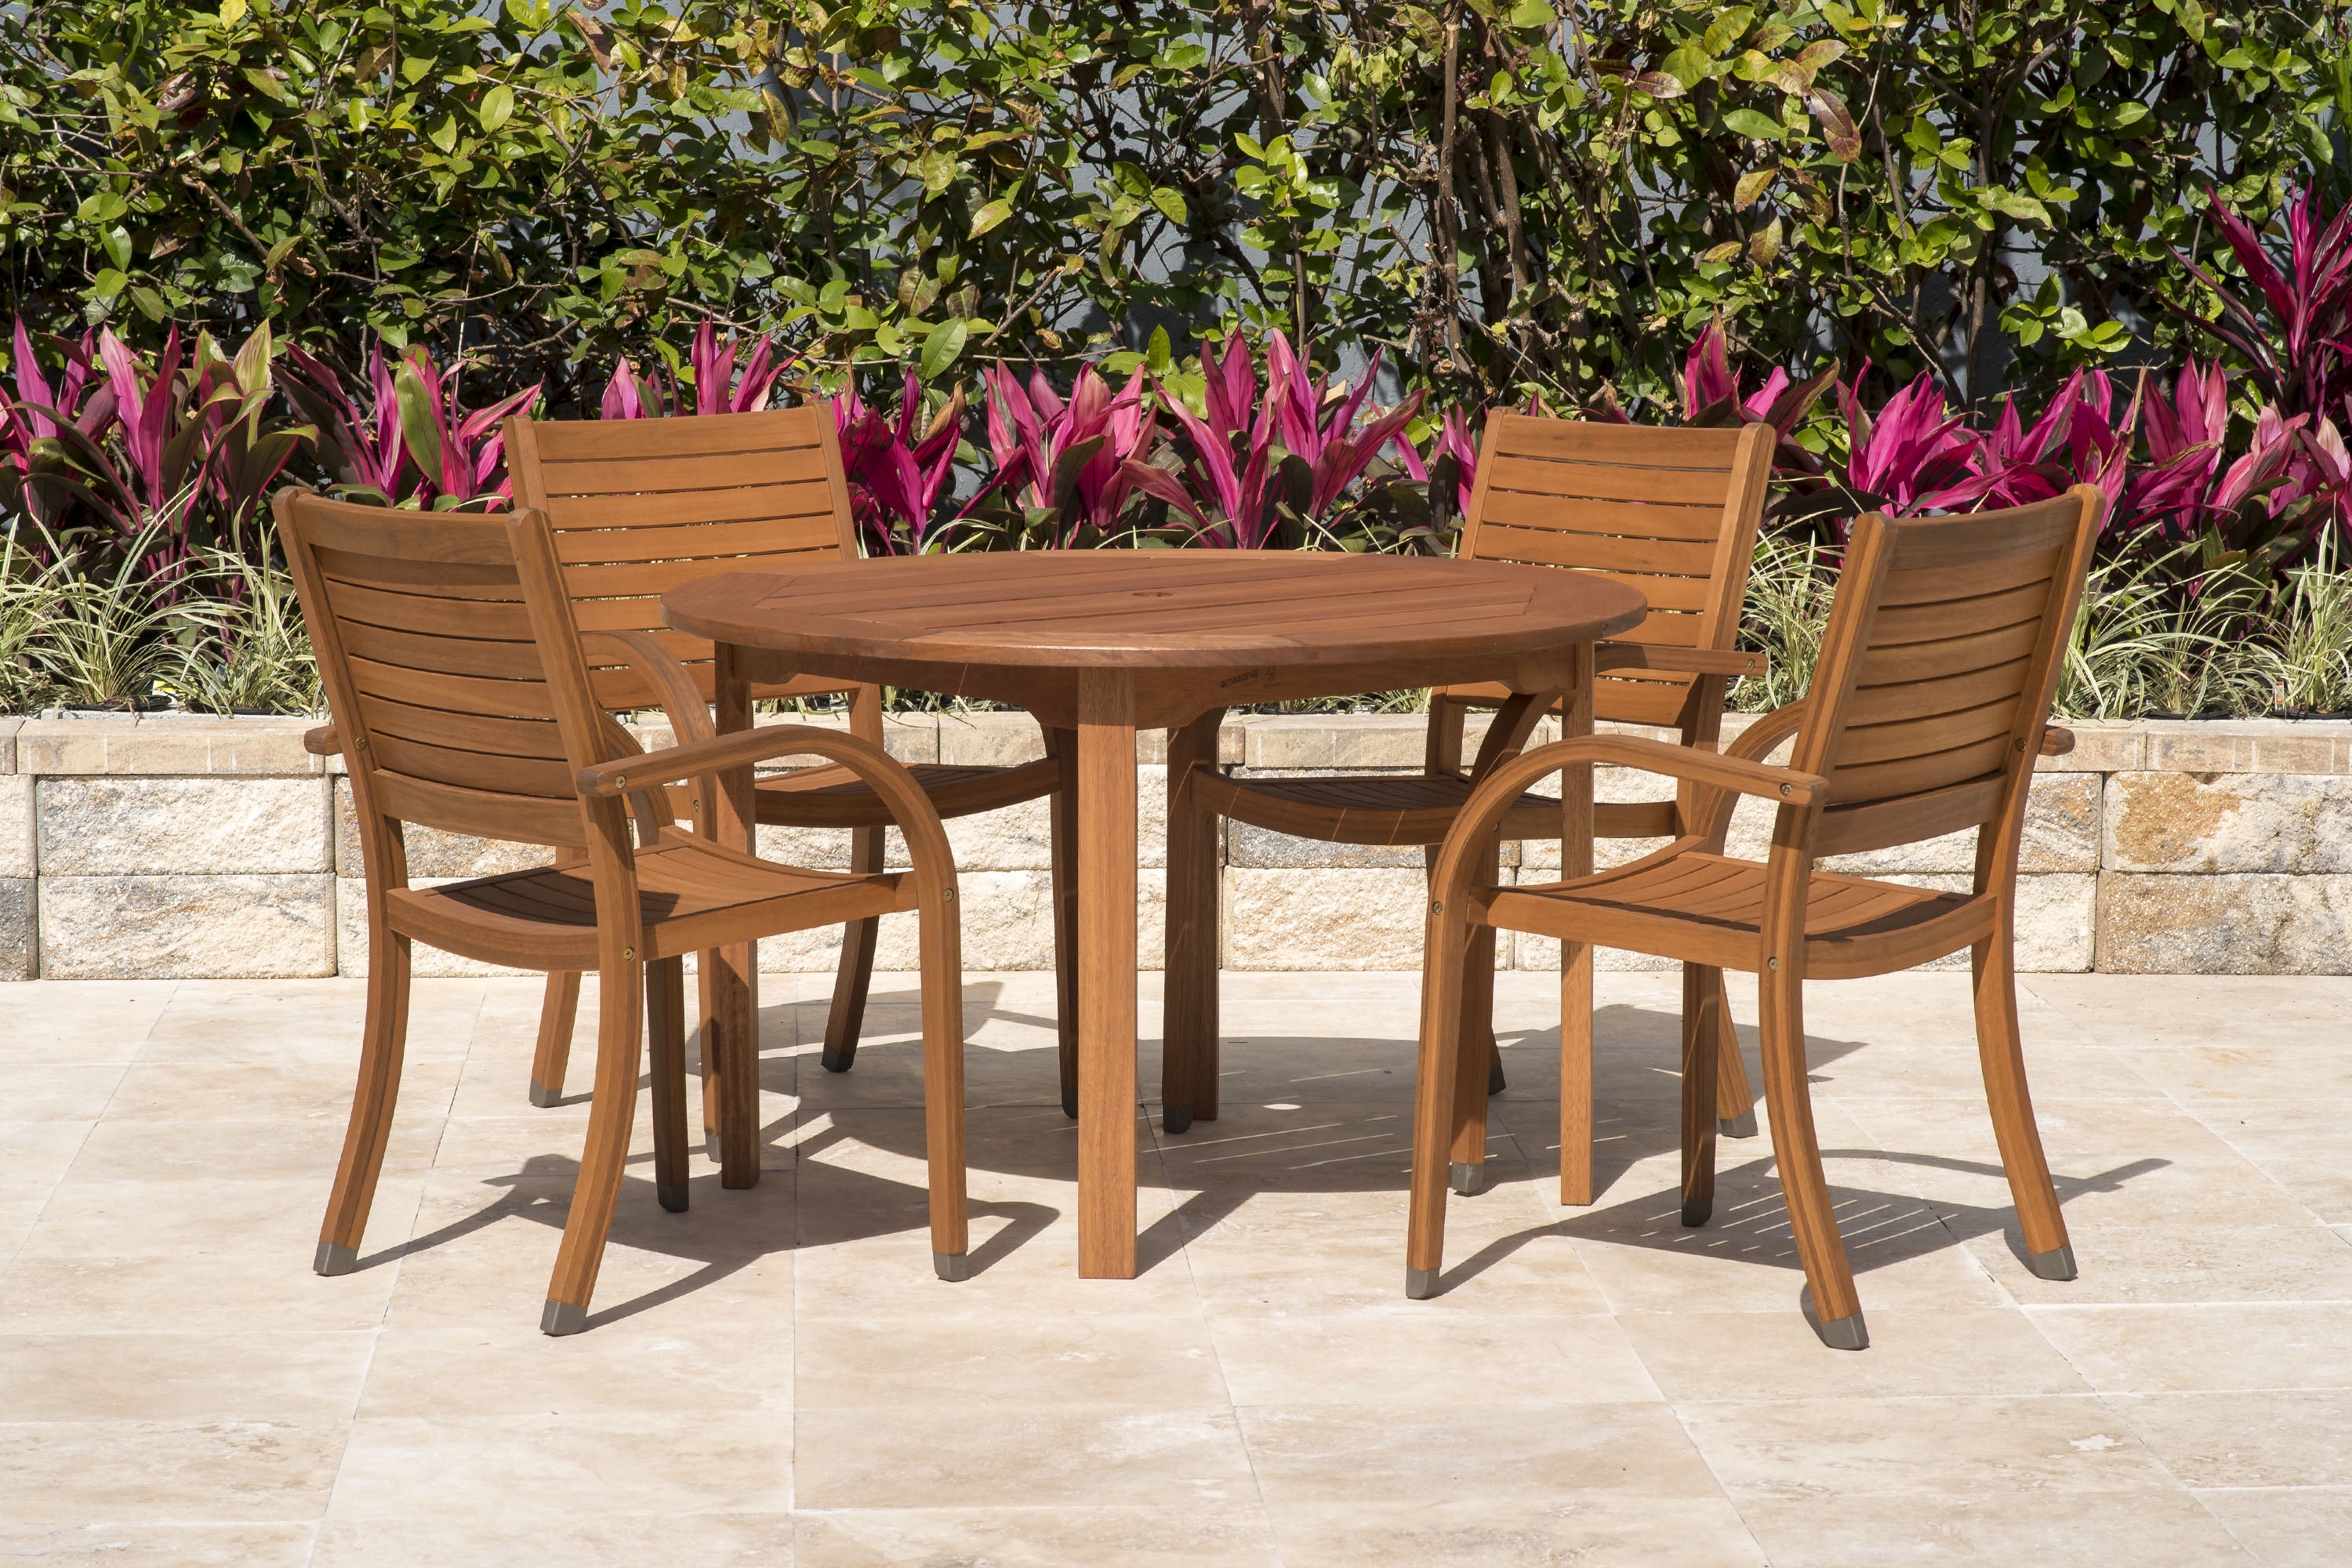 Ia Arizona 5 Piece Round Patio, Round Wooden Garden Table And Chairs Set Of 4